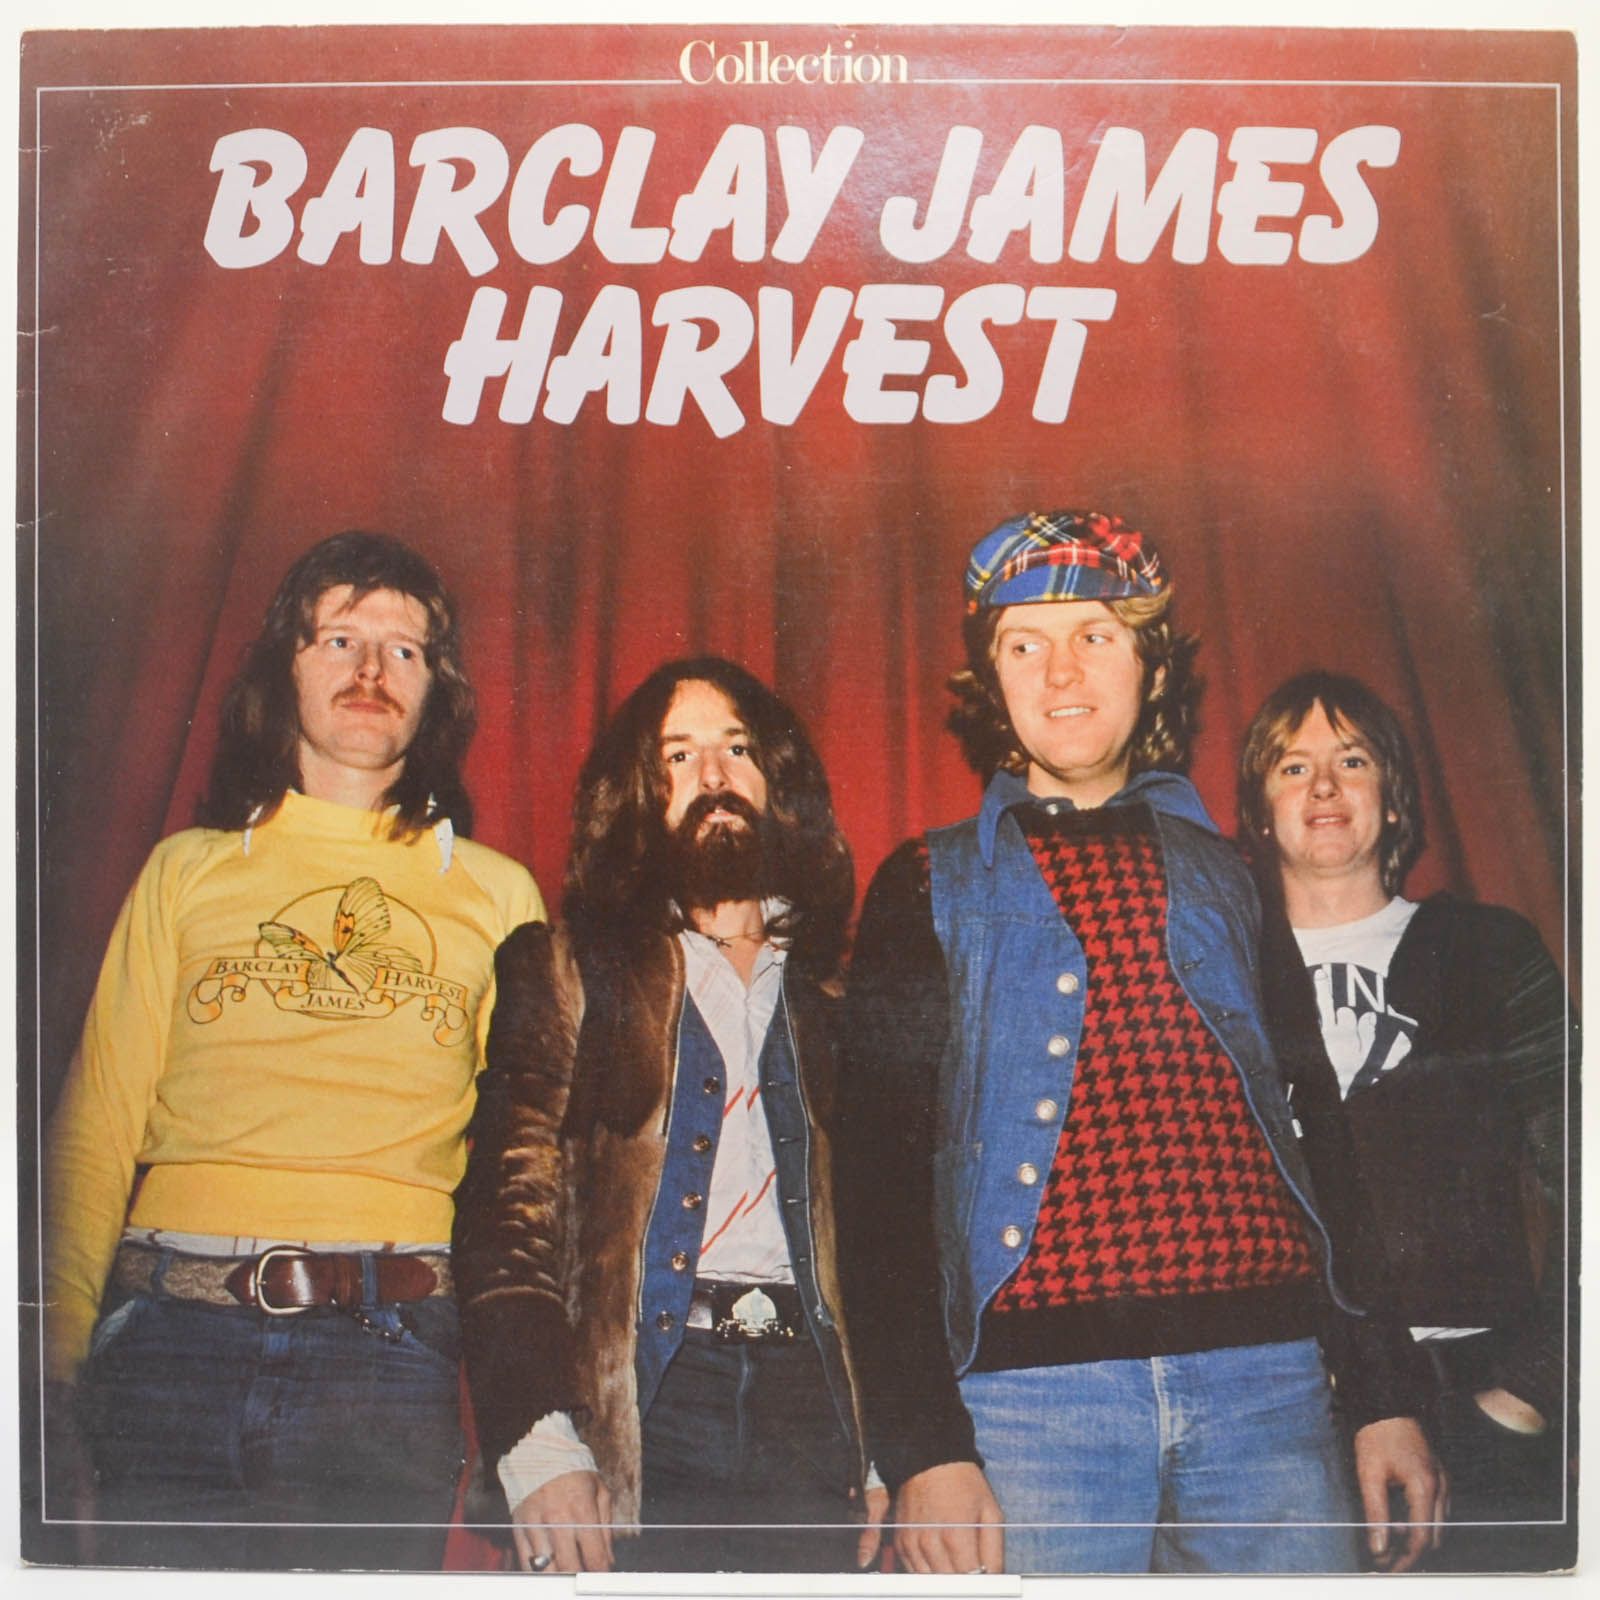 Barclay James Harvest — Collection, 1981